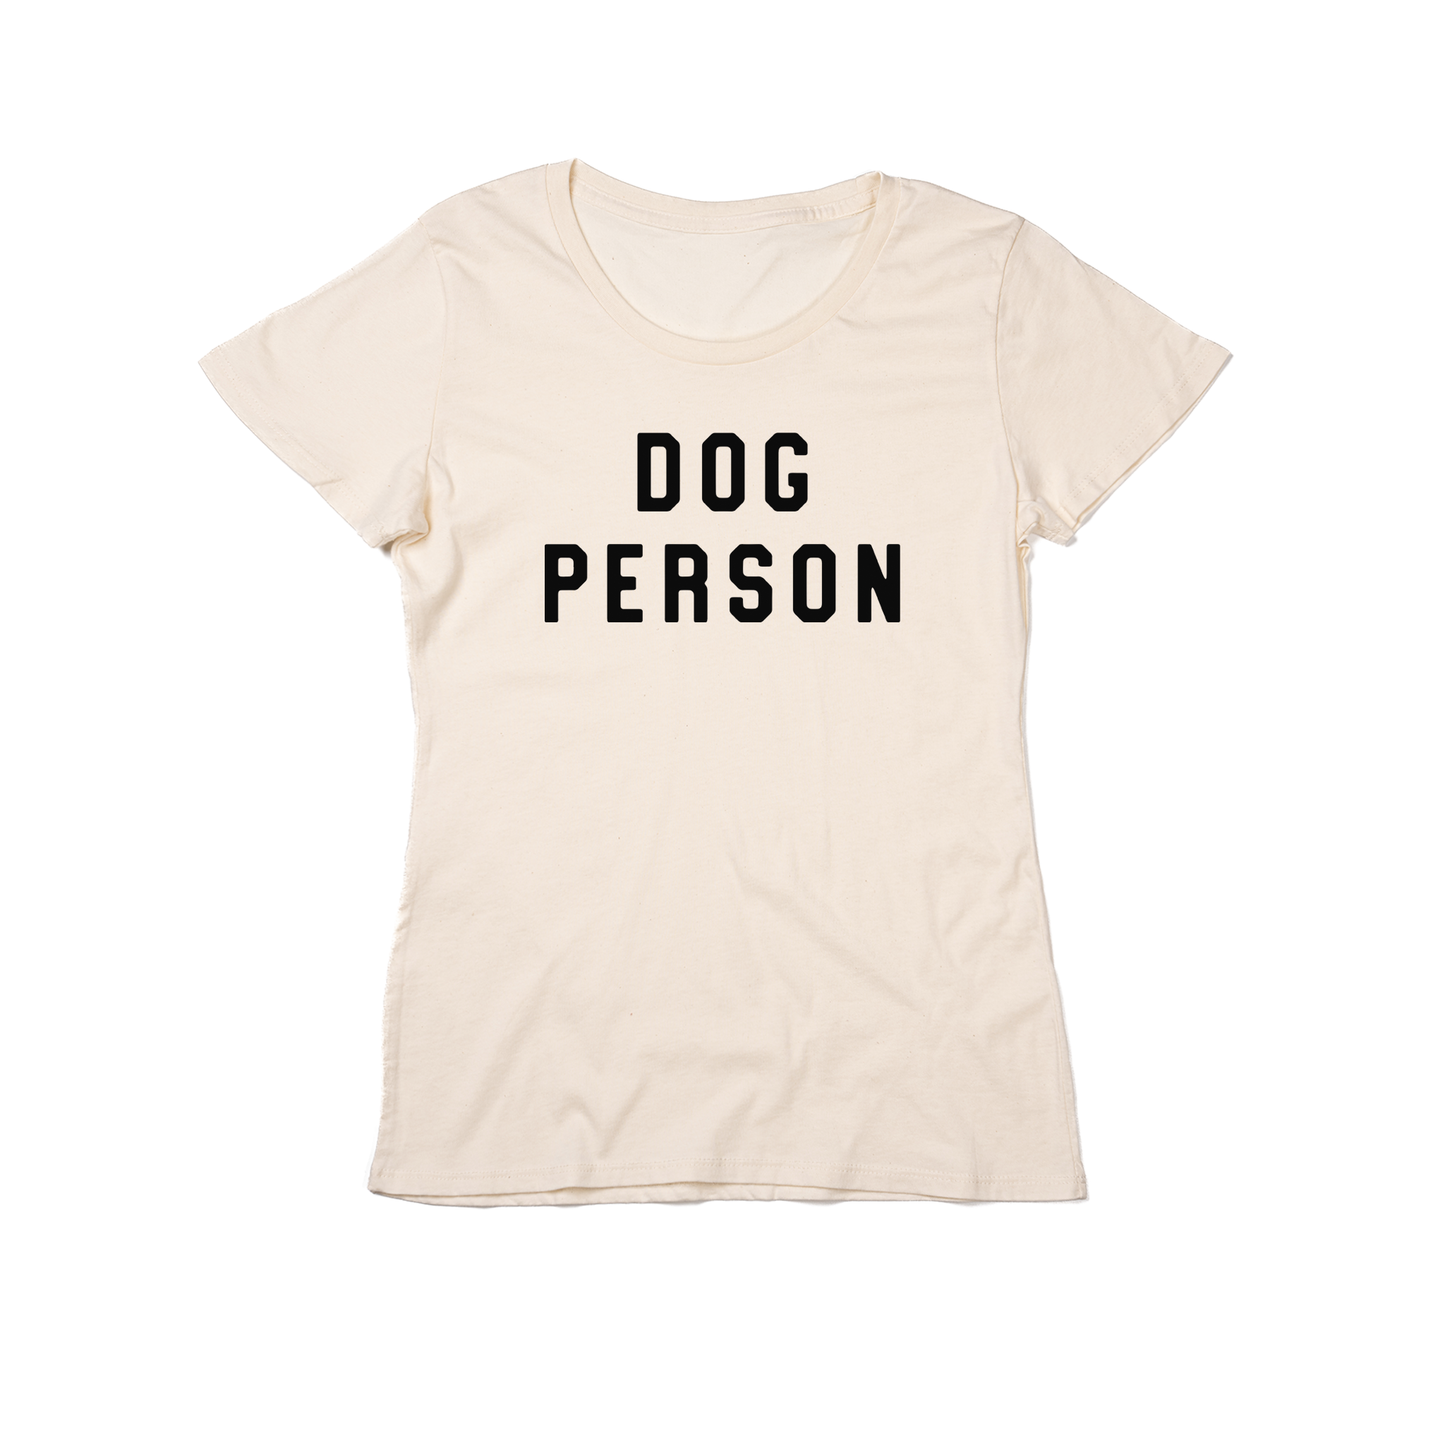 Dog Person (Black) - Women's Fitted Tee (Natural)